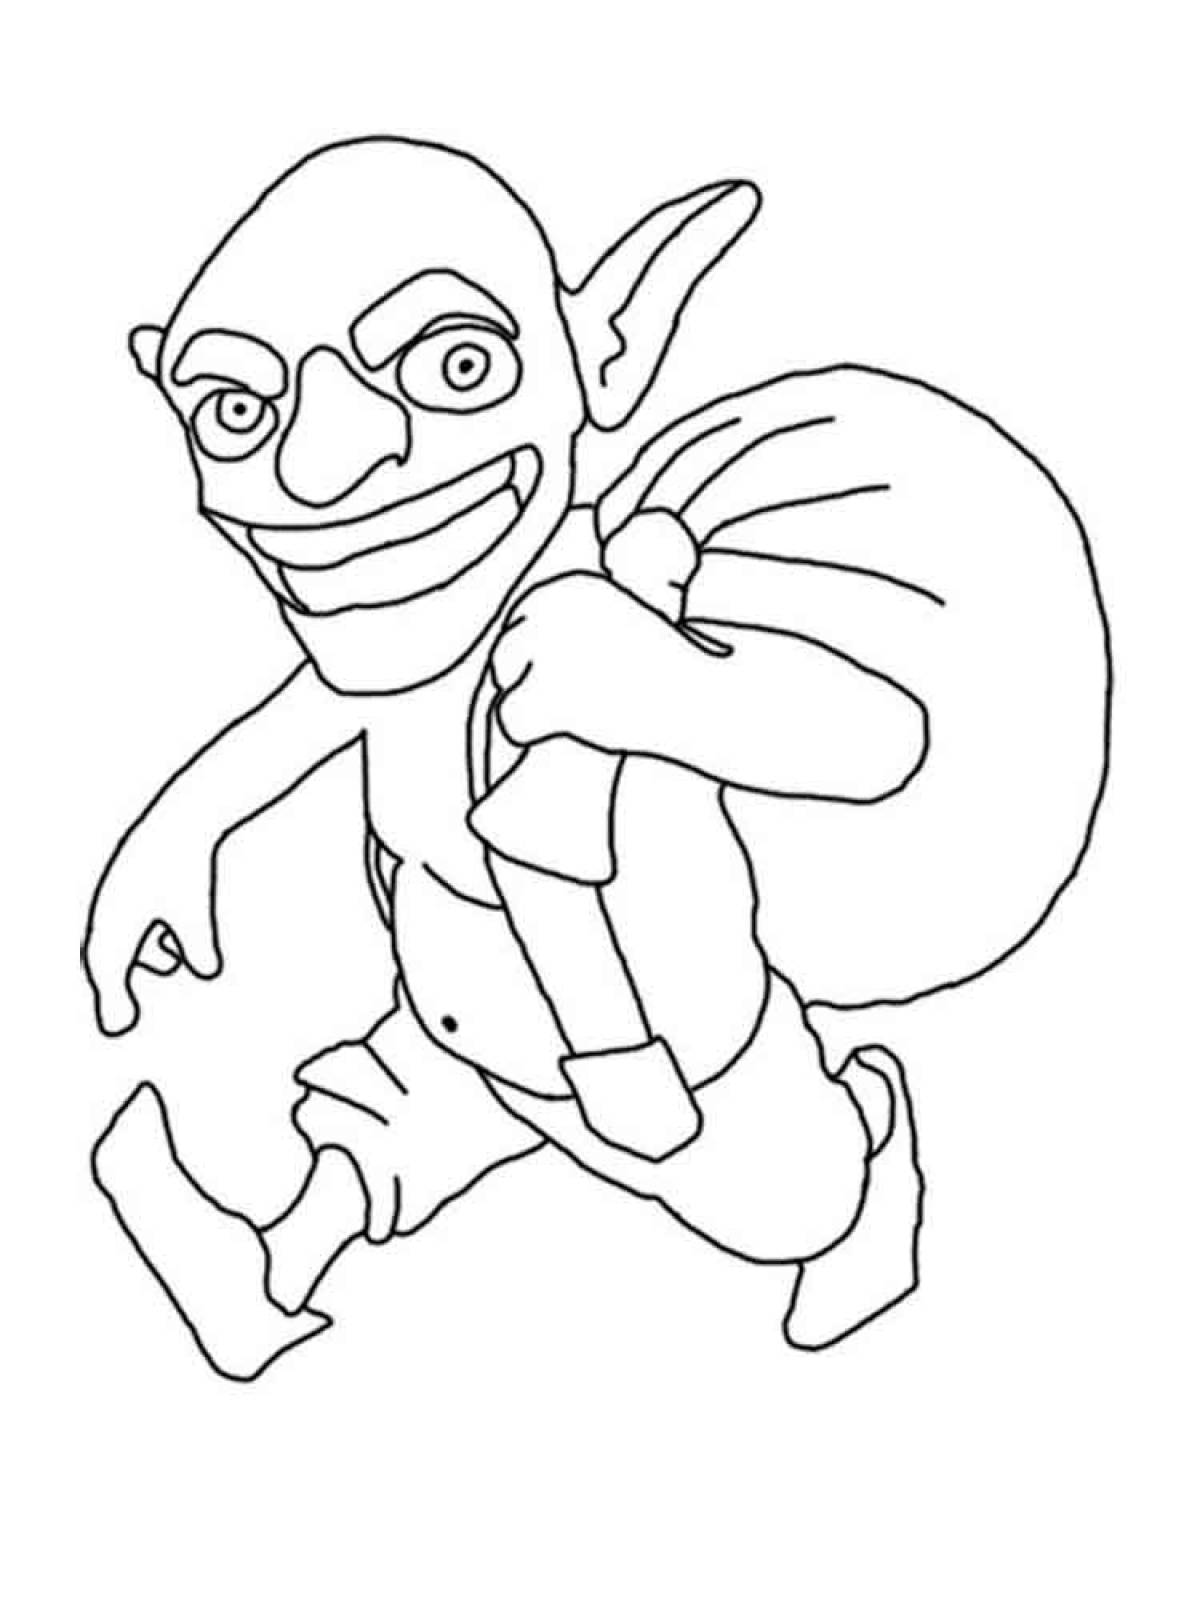 Photo Clash royale coloring page